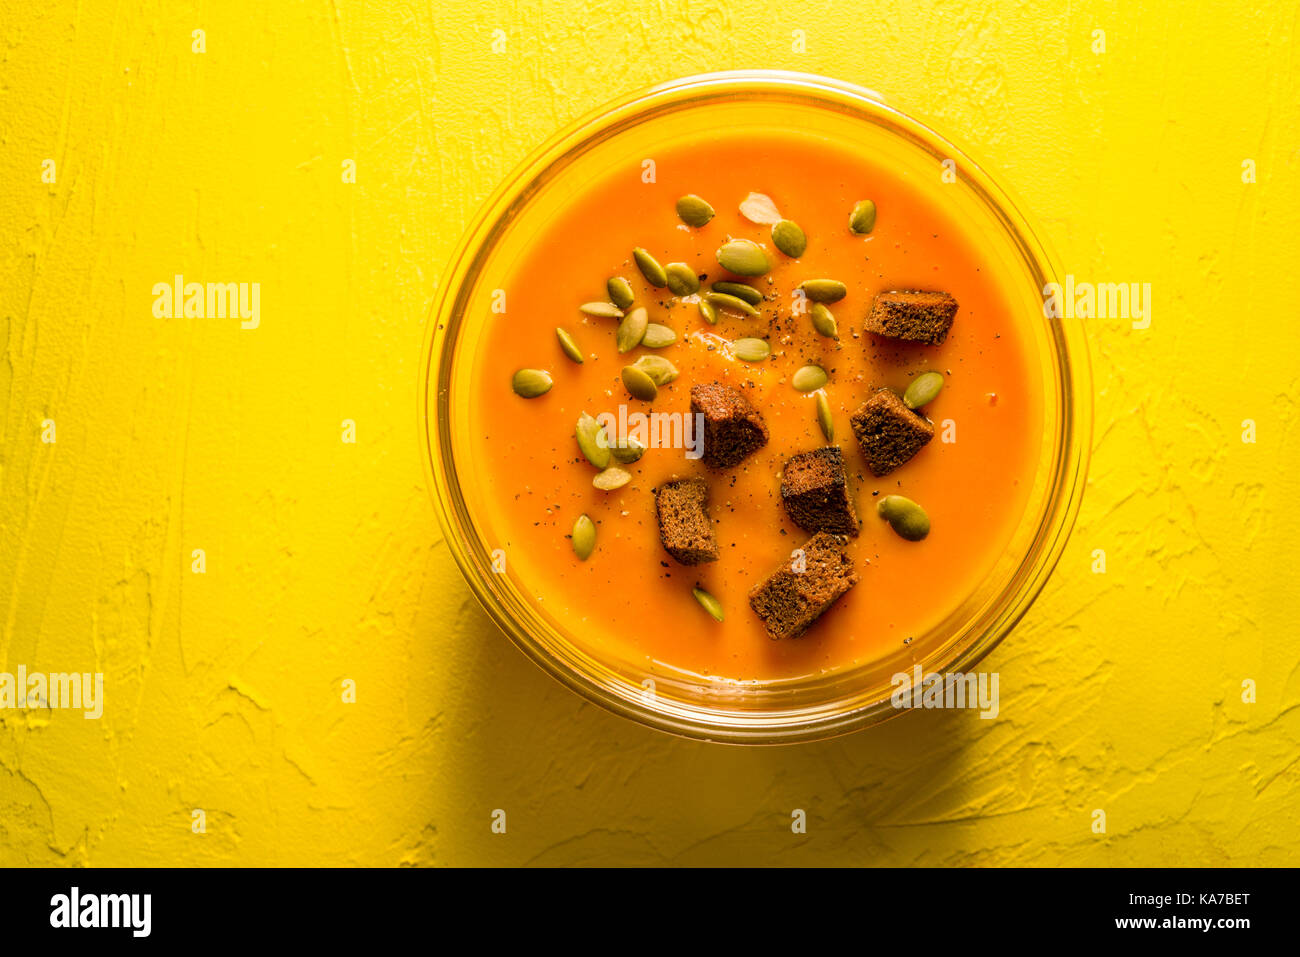 Pumpkin soup with seeds and croutons on a yellow table horizontal Stock Photo